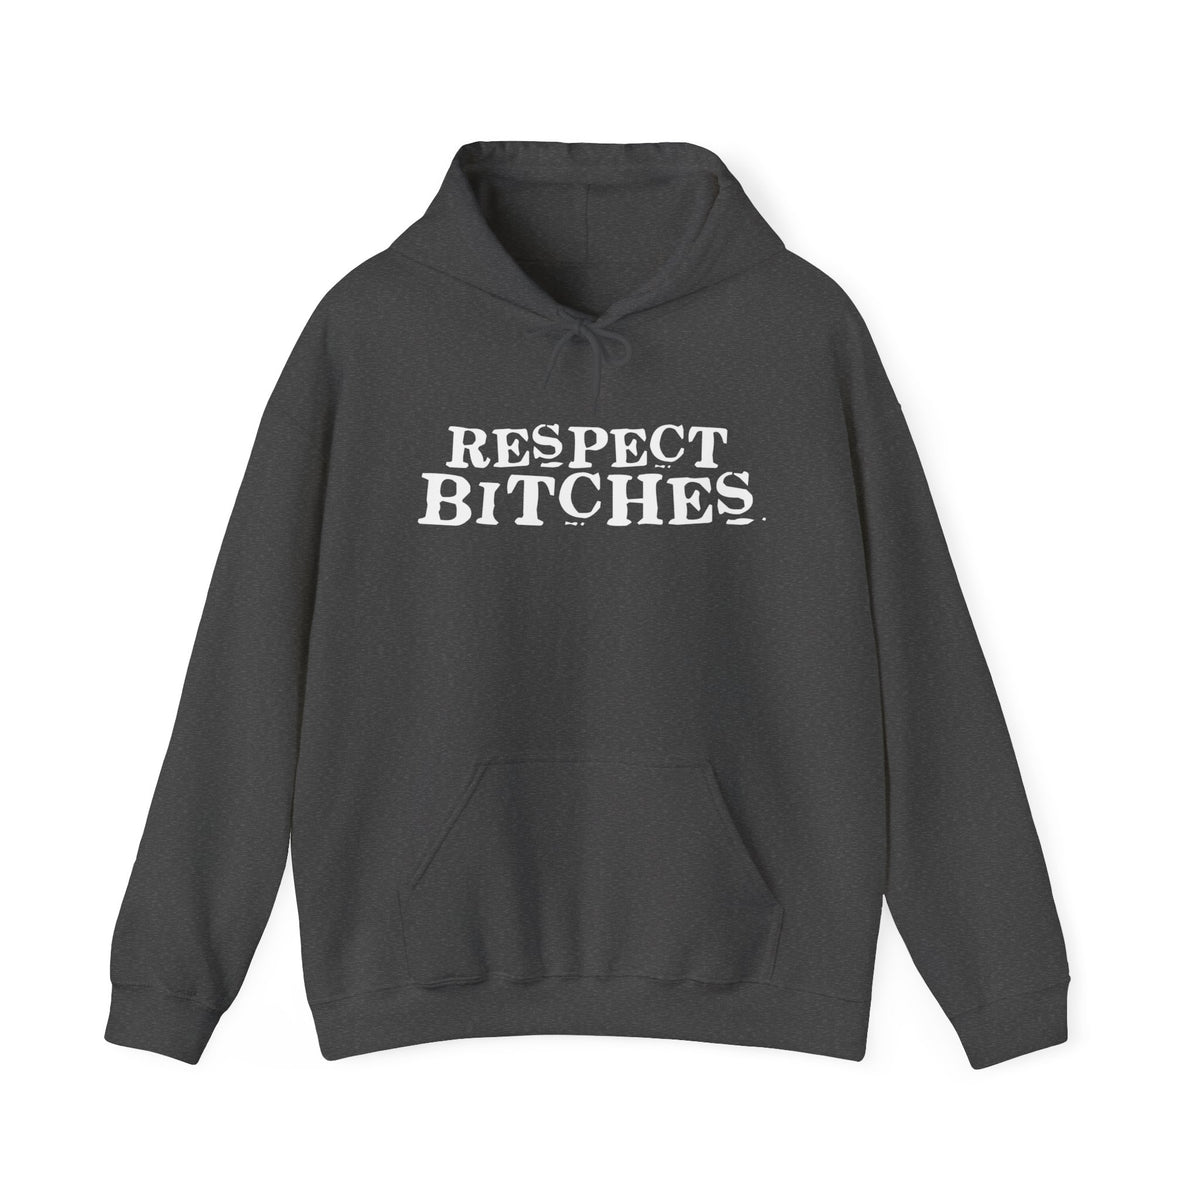 Respect Bitches - Hoodie